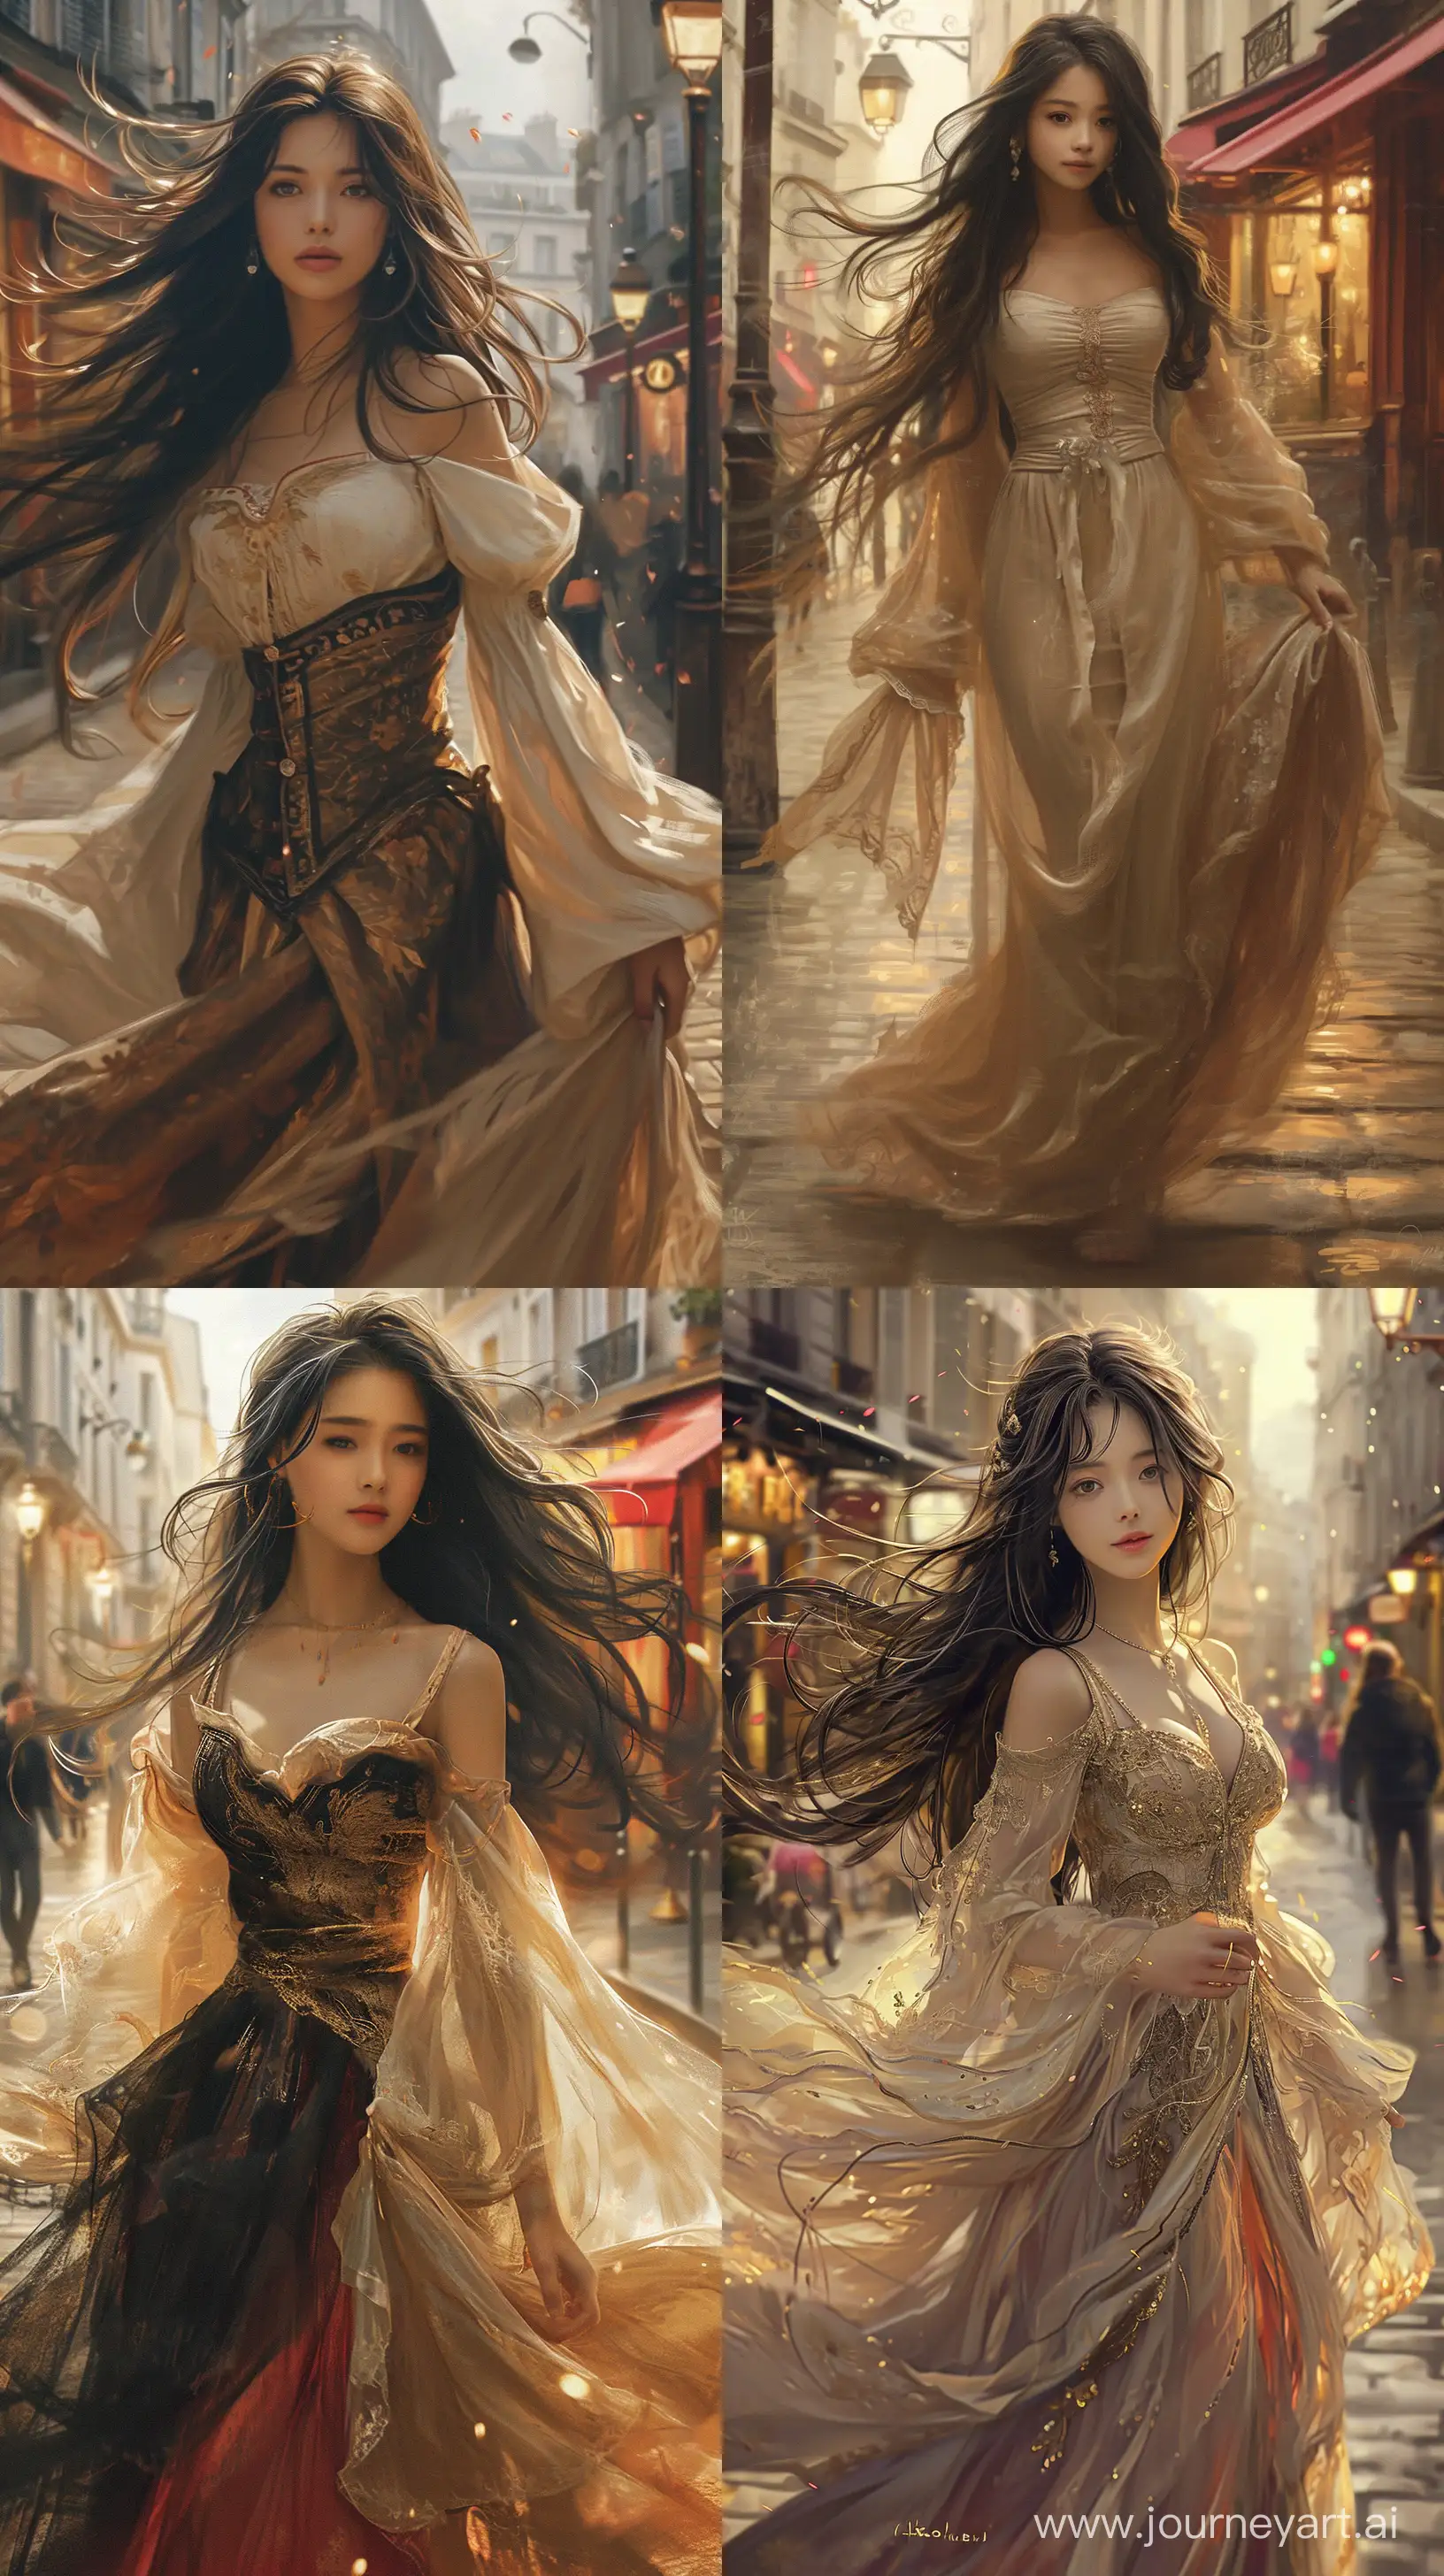 An elegant Eastern beauty with long flowing hair, clad in a sensual French gown, casually strolls down Parisian streets. Capture the romance of the scene in an oil painting style, with soft street lighting accents in a warm color scheme. Focus closely for a full-body shot that reveals intricate details, --ar 9:16